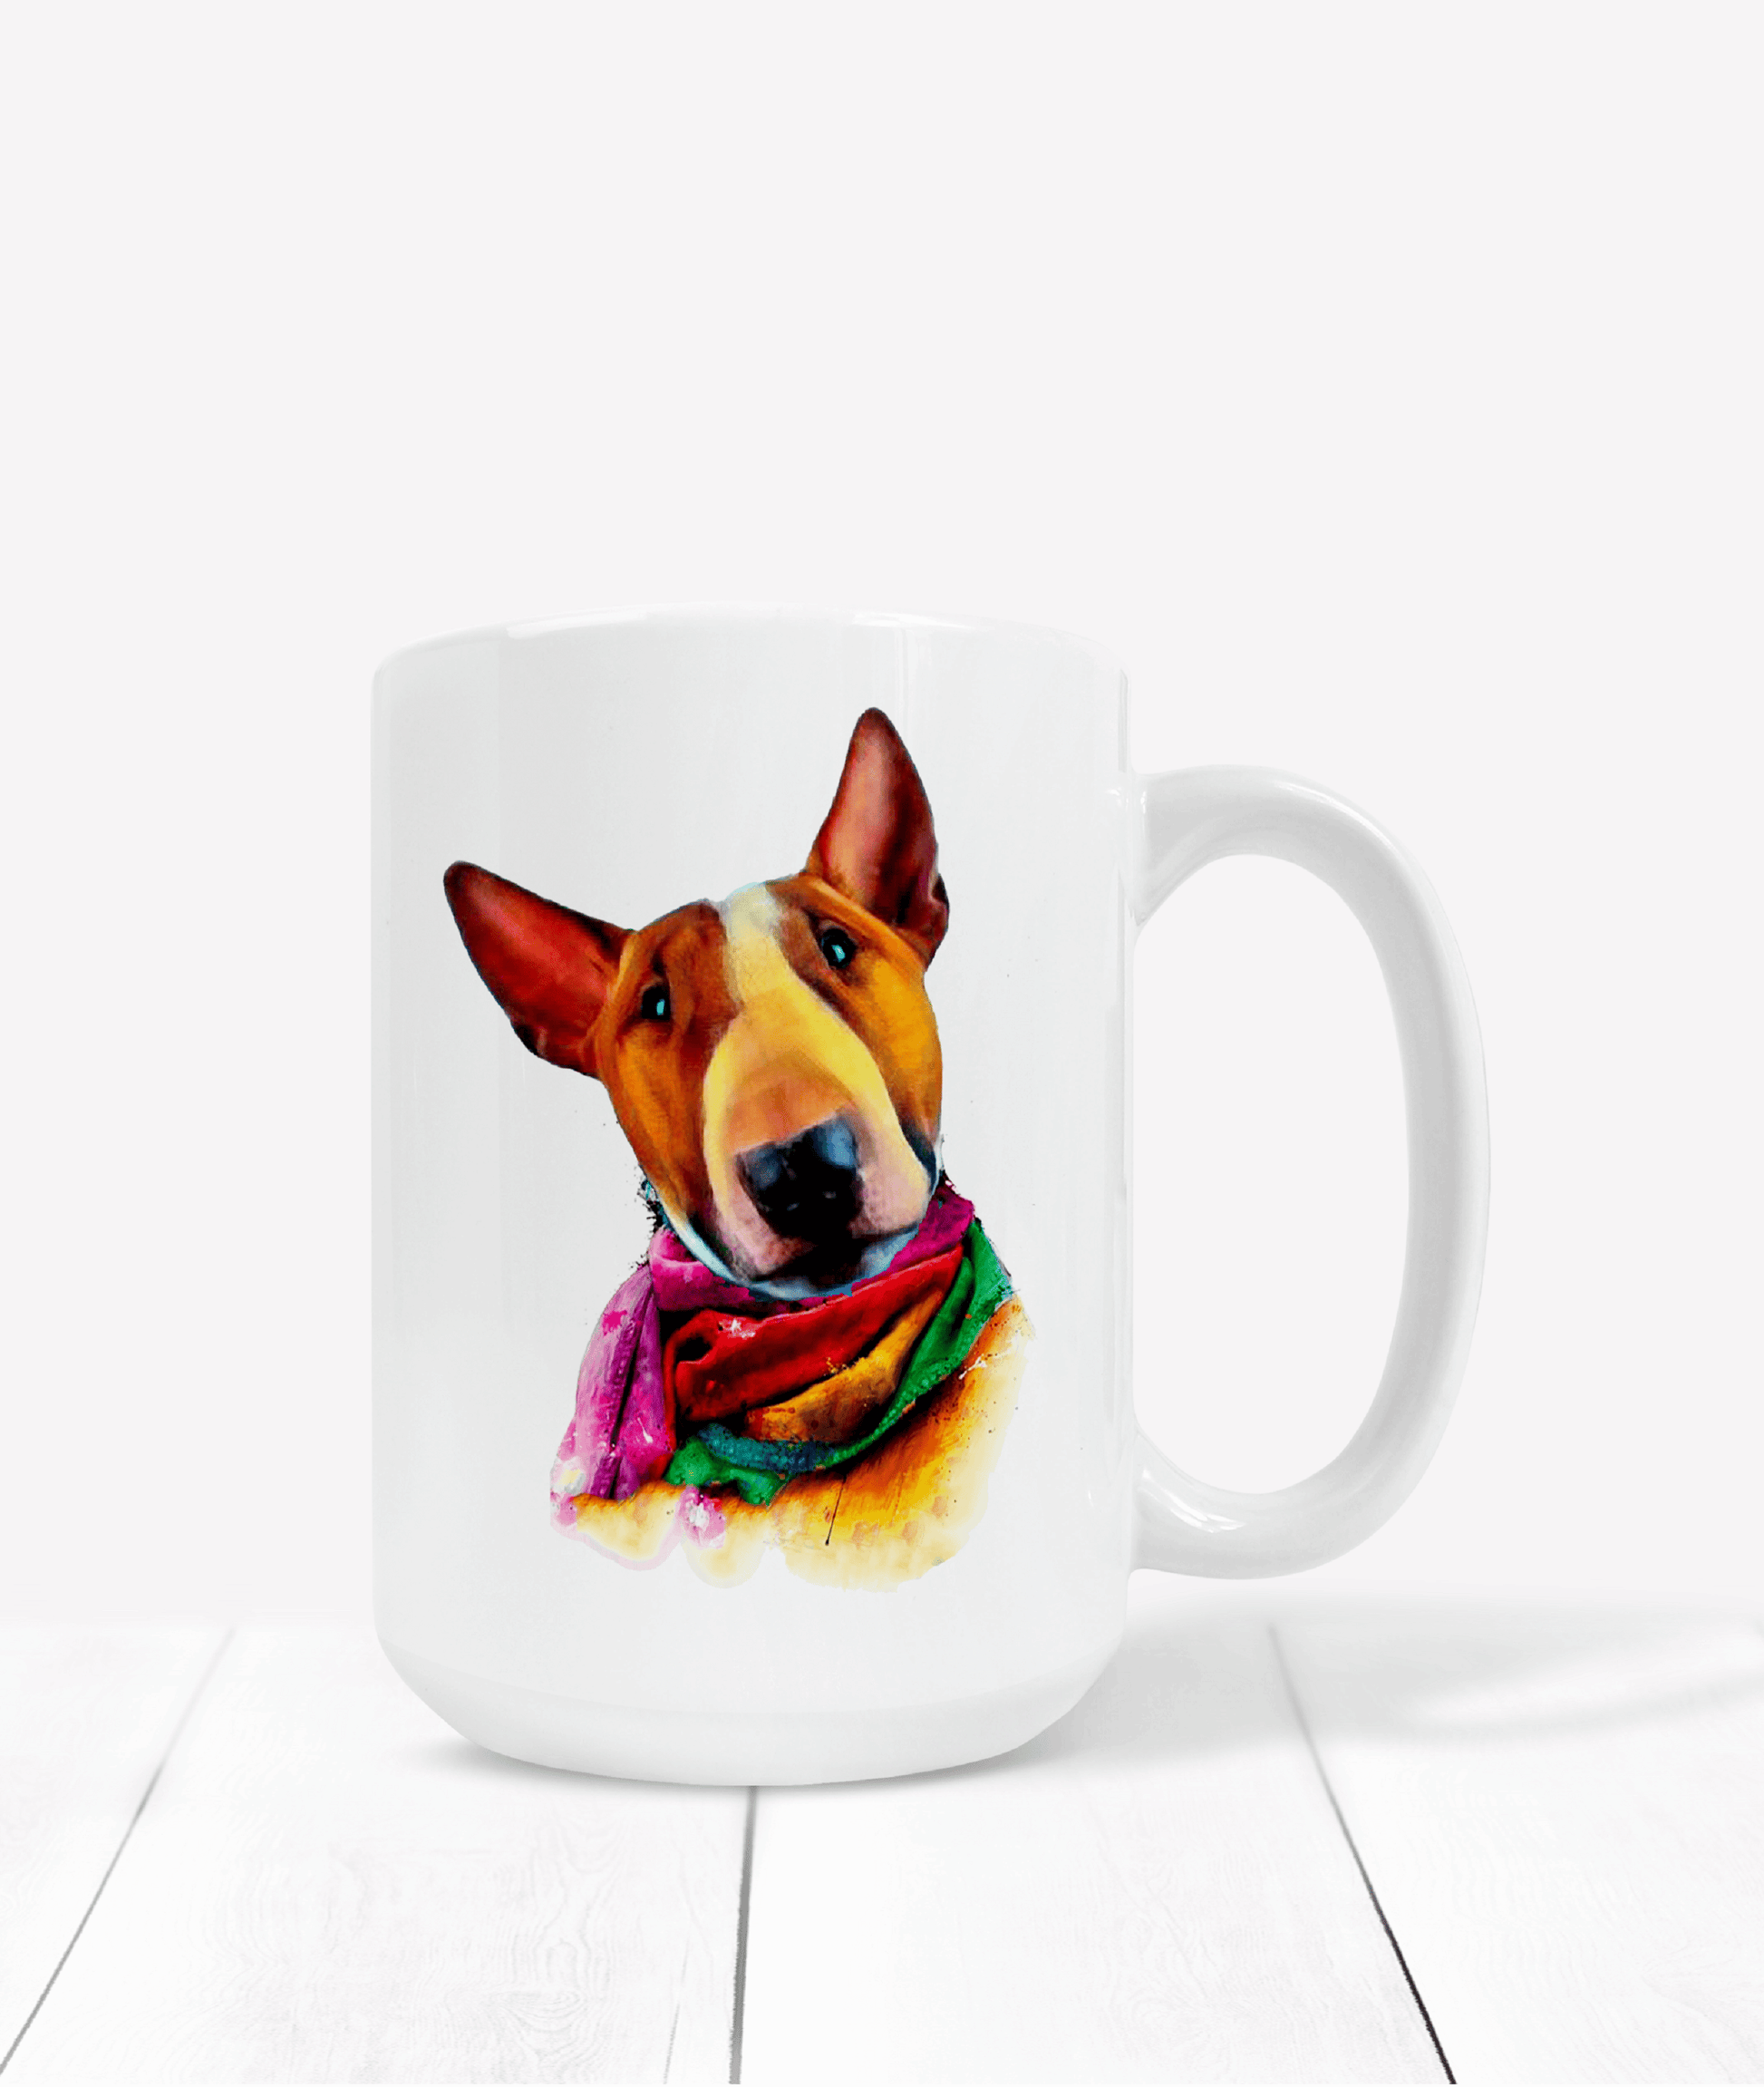  English Bull Terrier and Scarf Mug by Free Spirit Accessories sold by Free Spirit Accessories